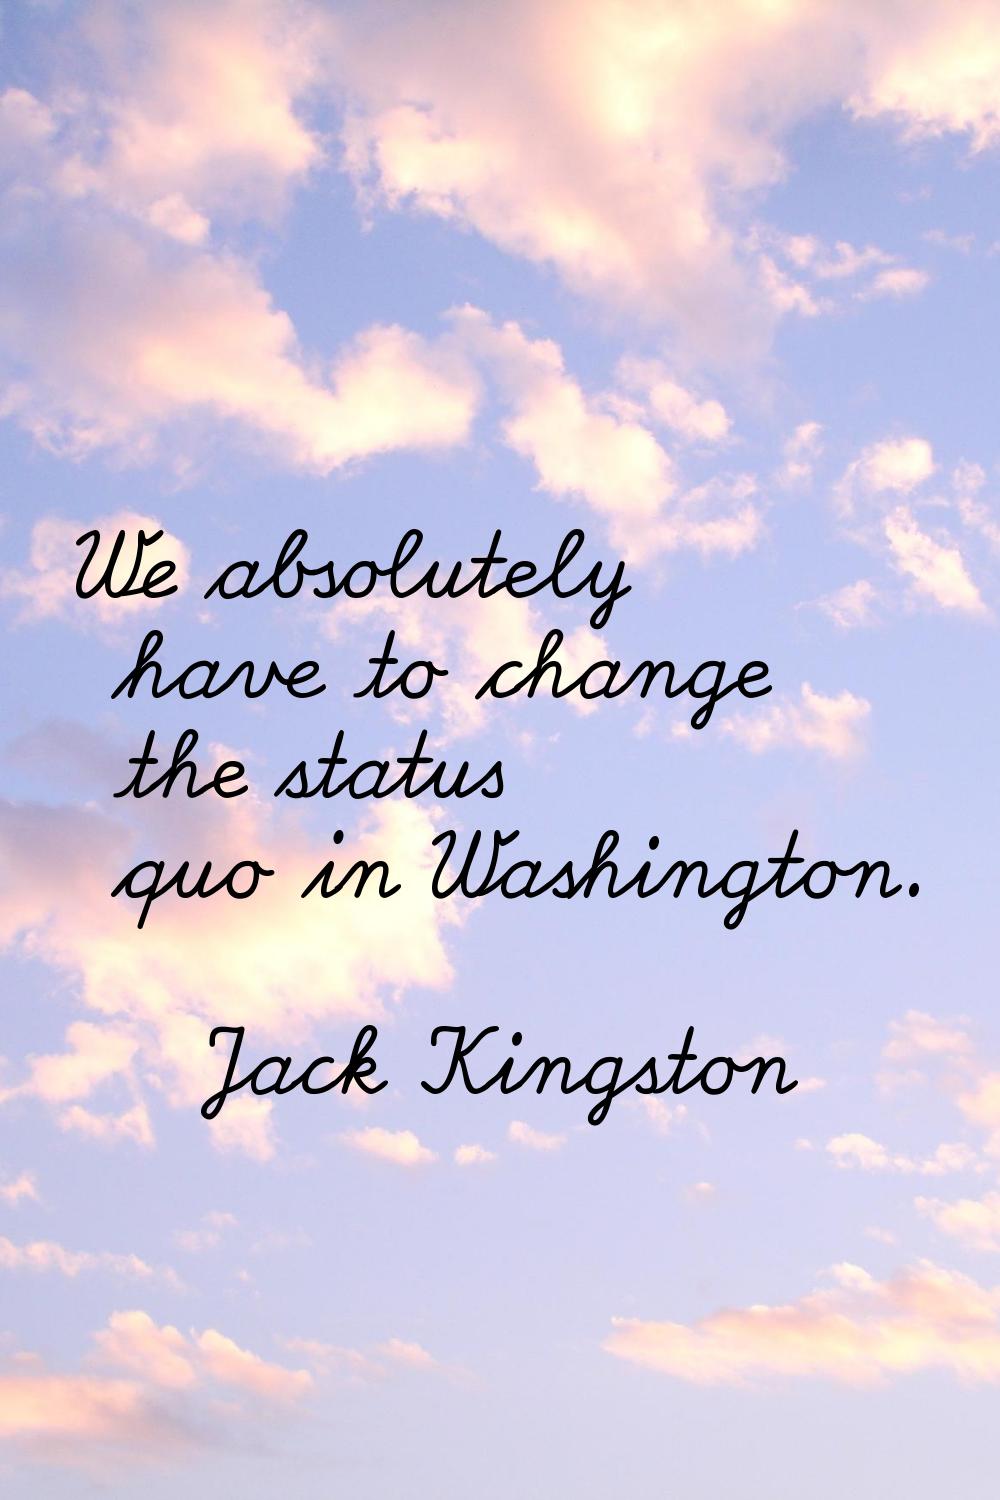 We absolutely have to change the status quo in Washington.